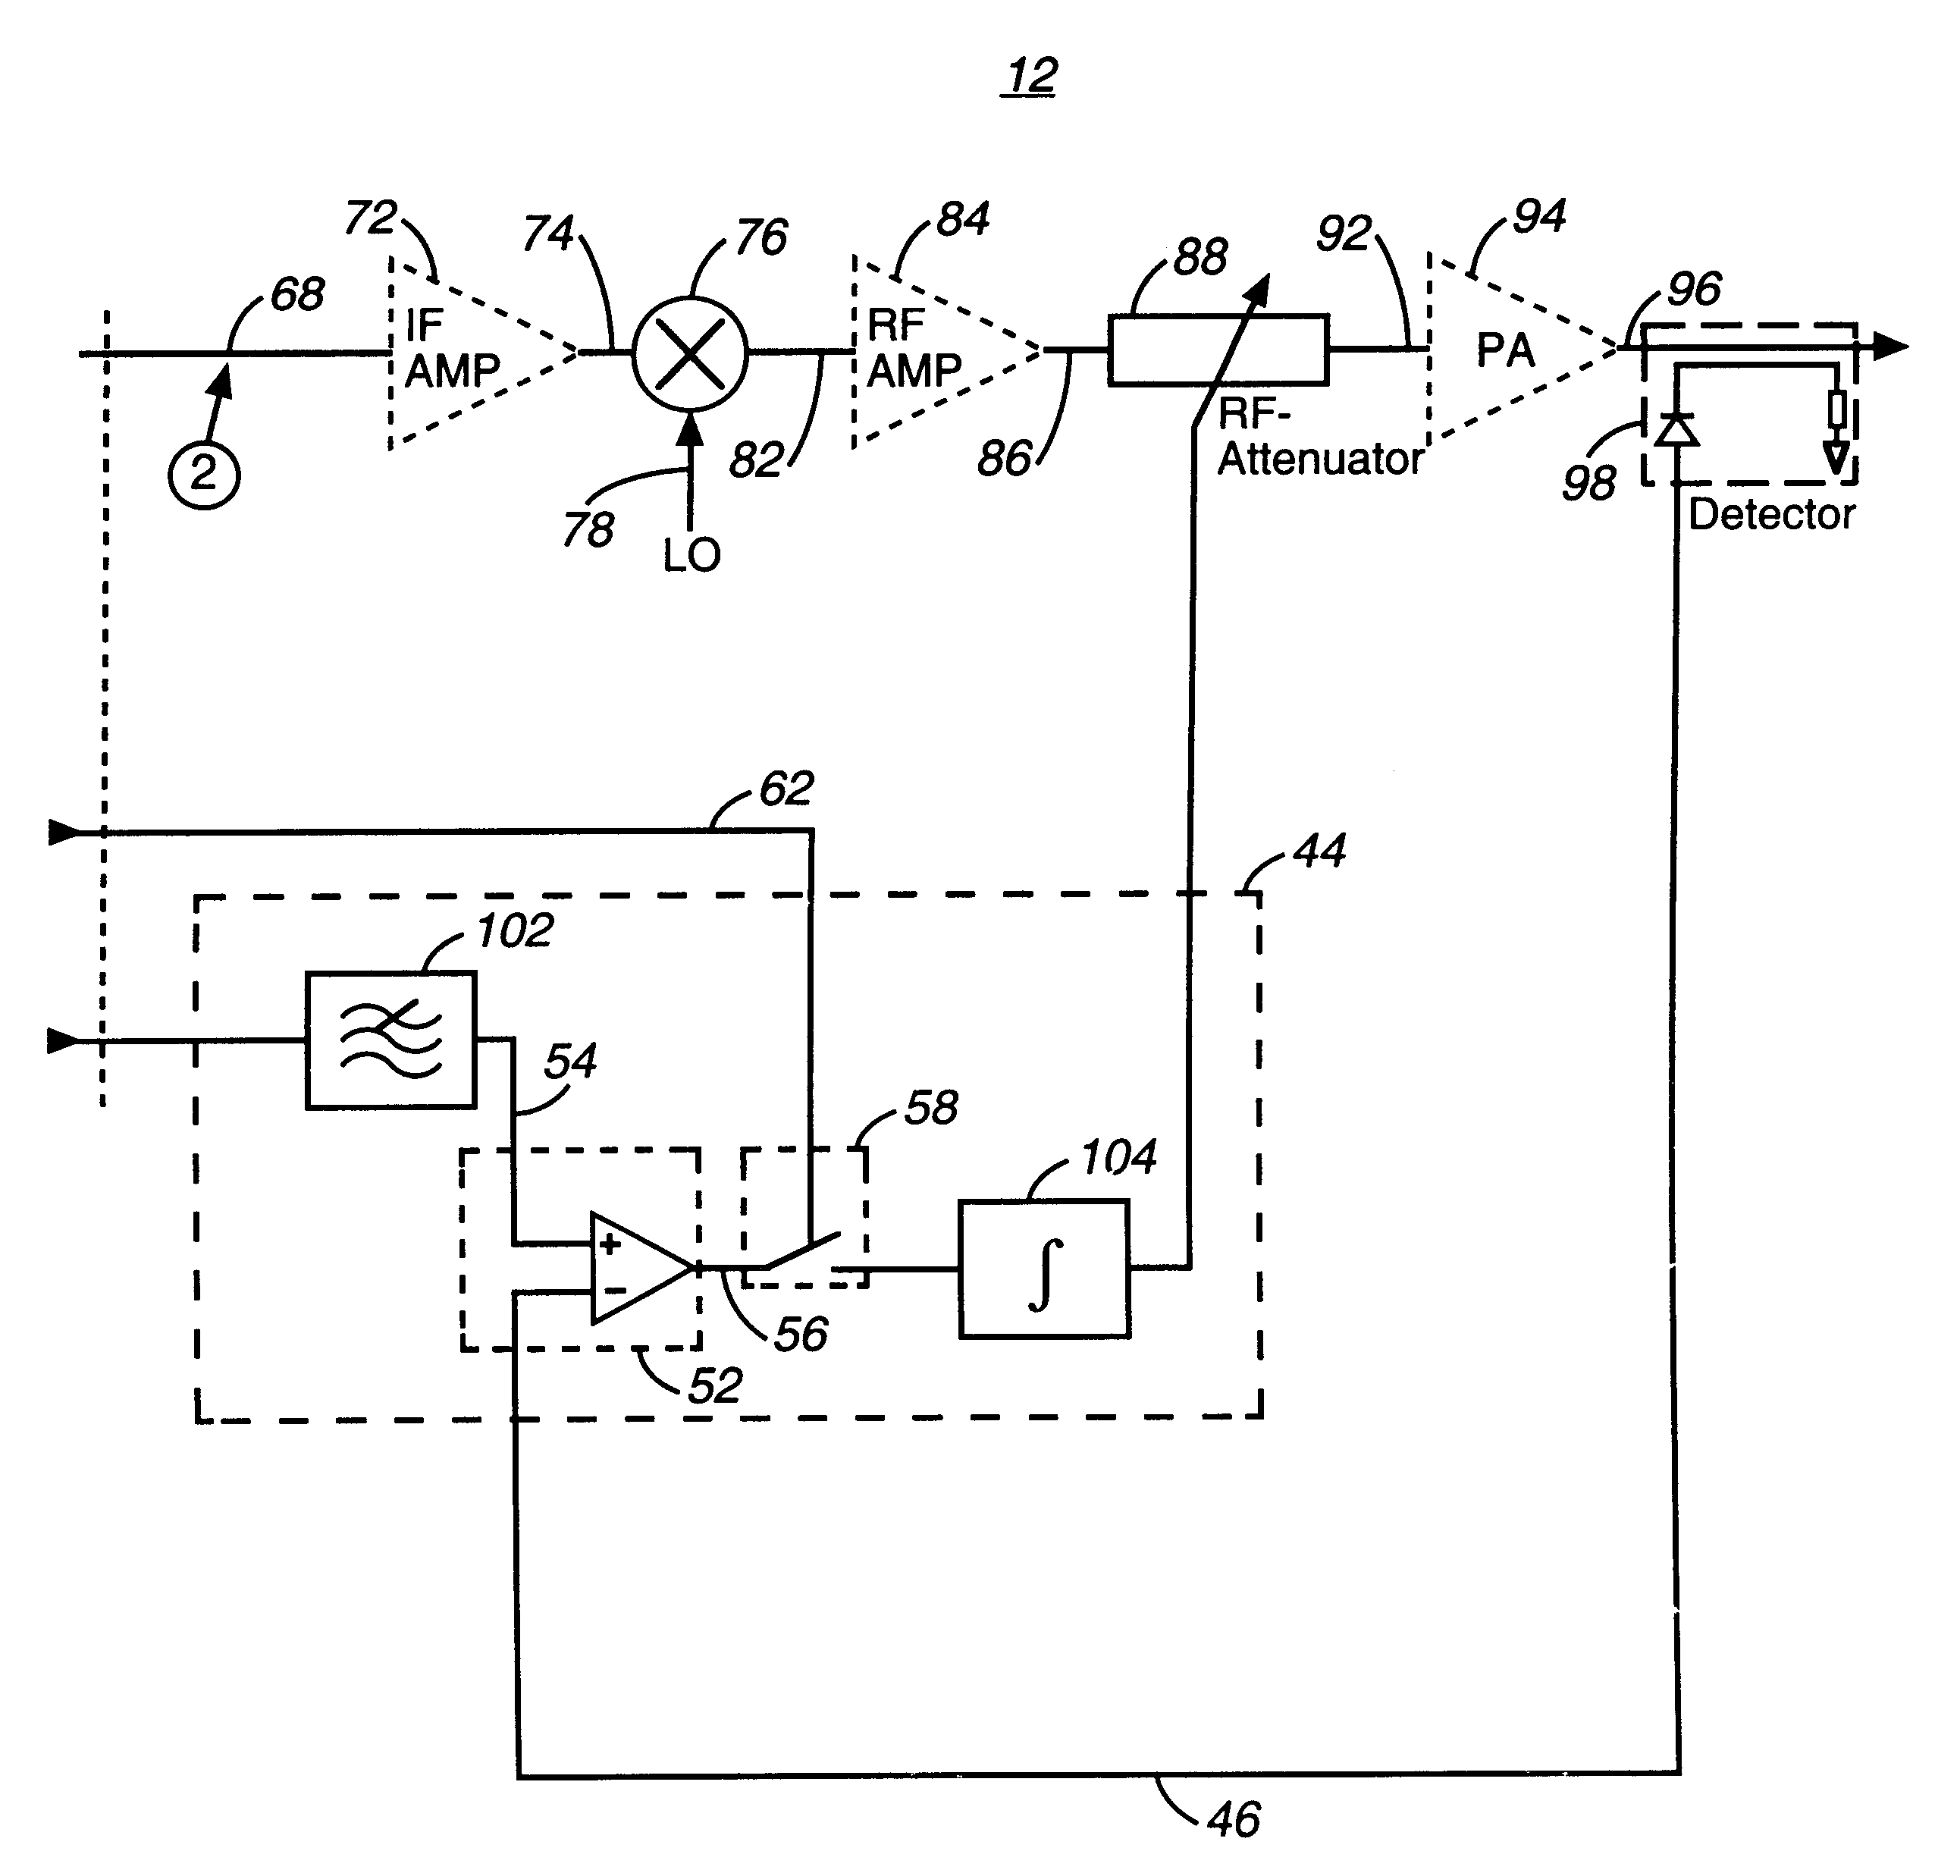 Power control apparatus, and associated method, for a sending station of a communication system